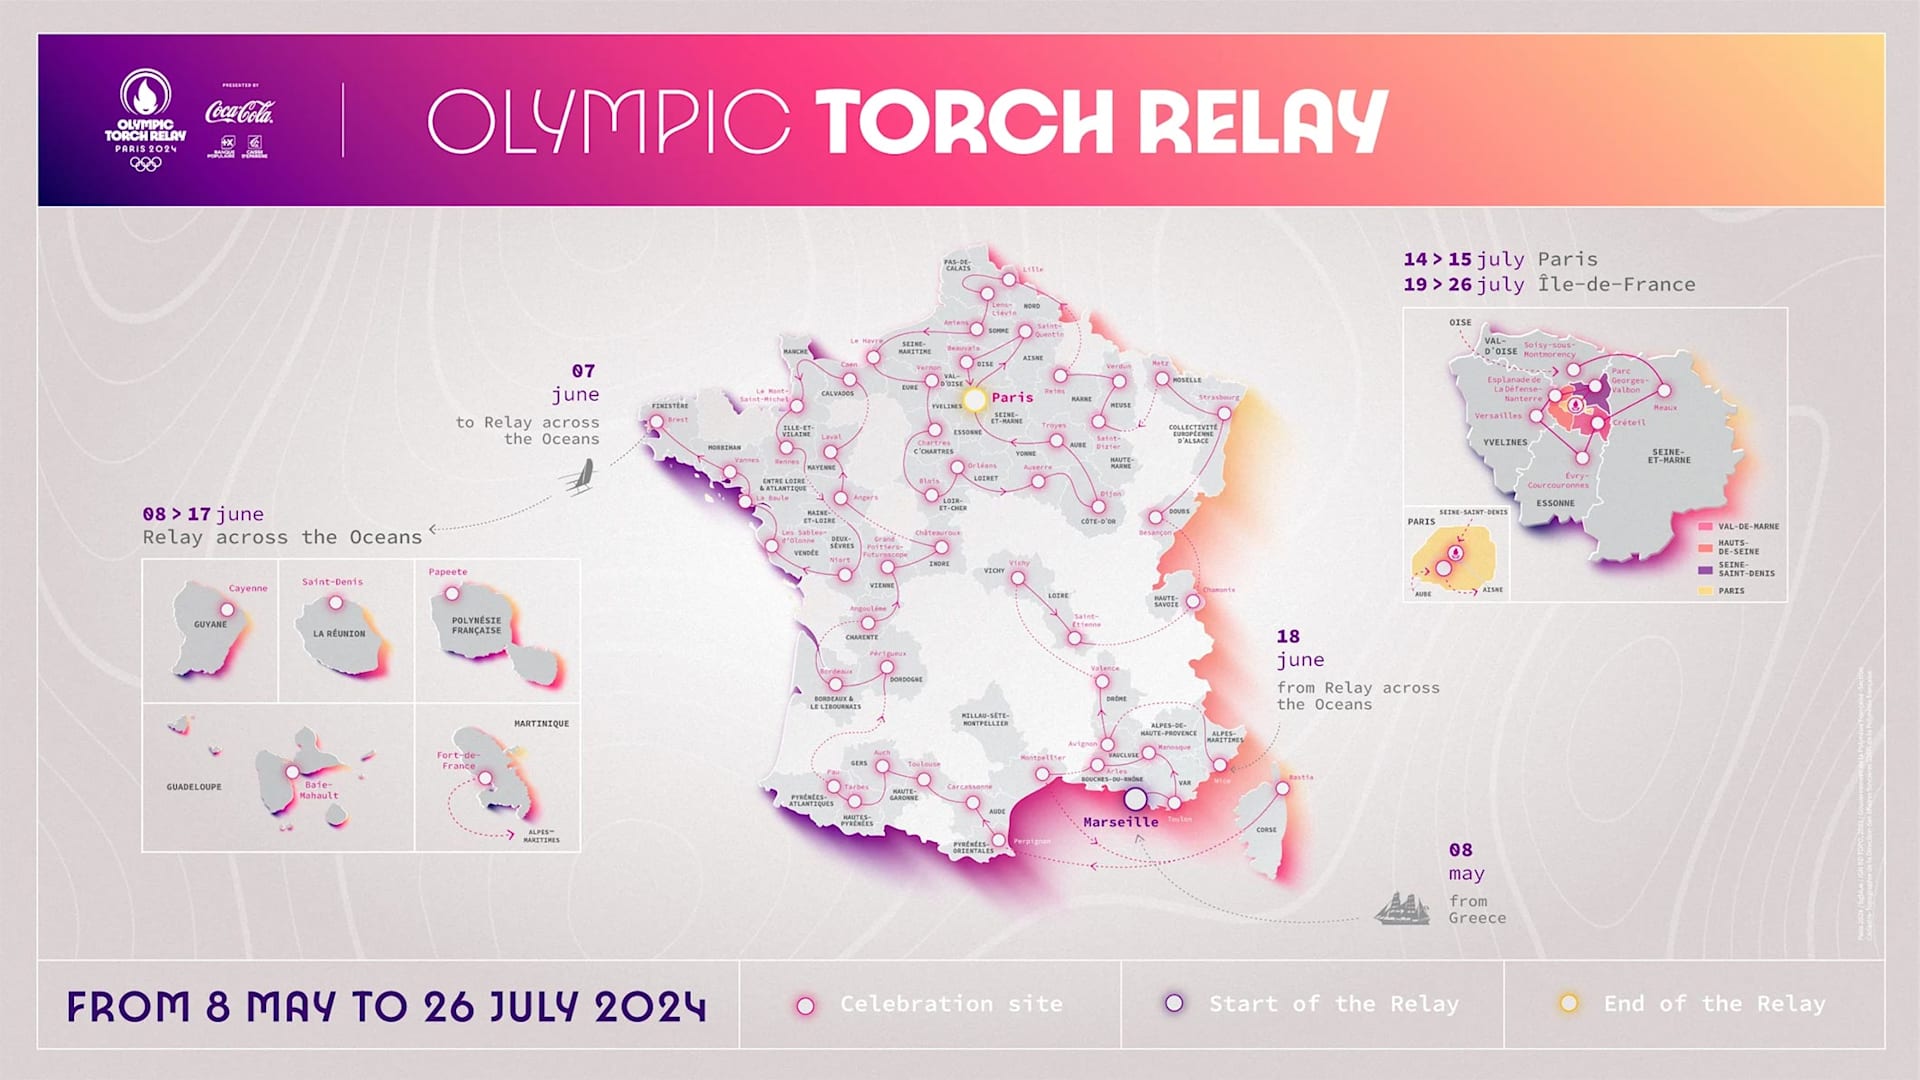 Paris 2024: here is the complete map of Olympics venues